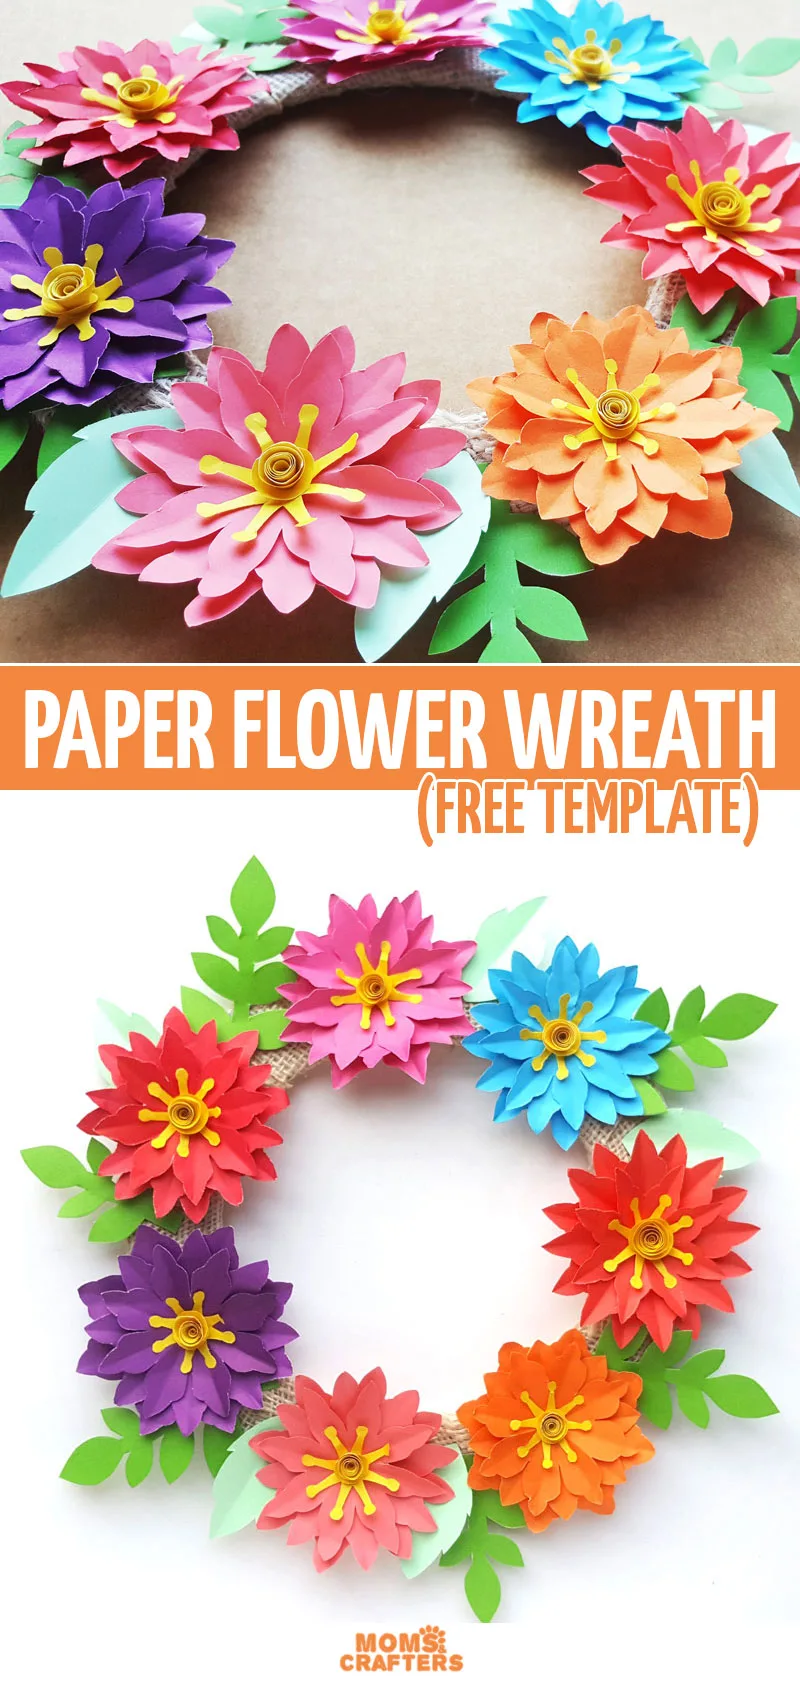 Click for a free printable paper flower templates and to learn how to make some beautiful spring and summer decor with a paper flower wreath tutorial